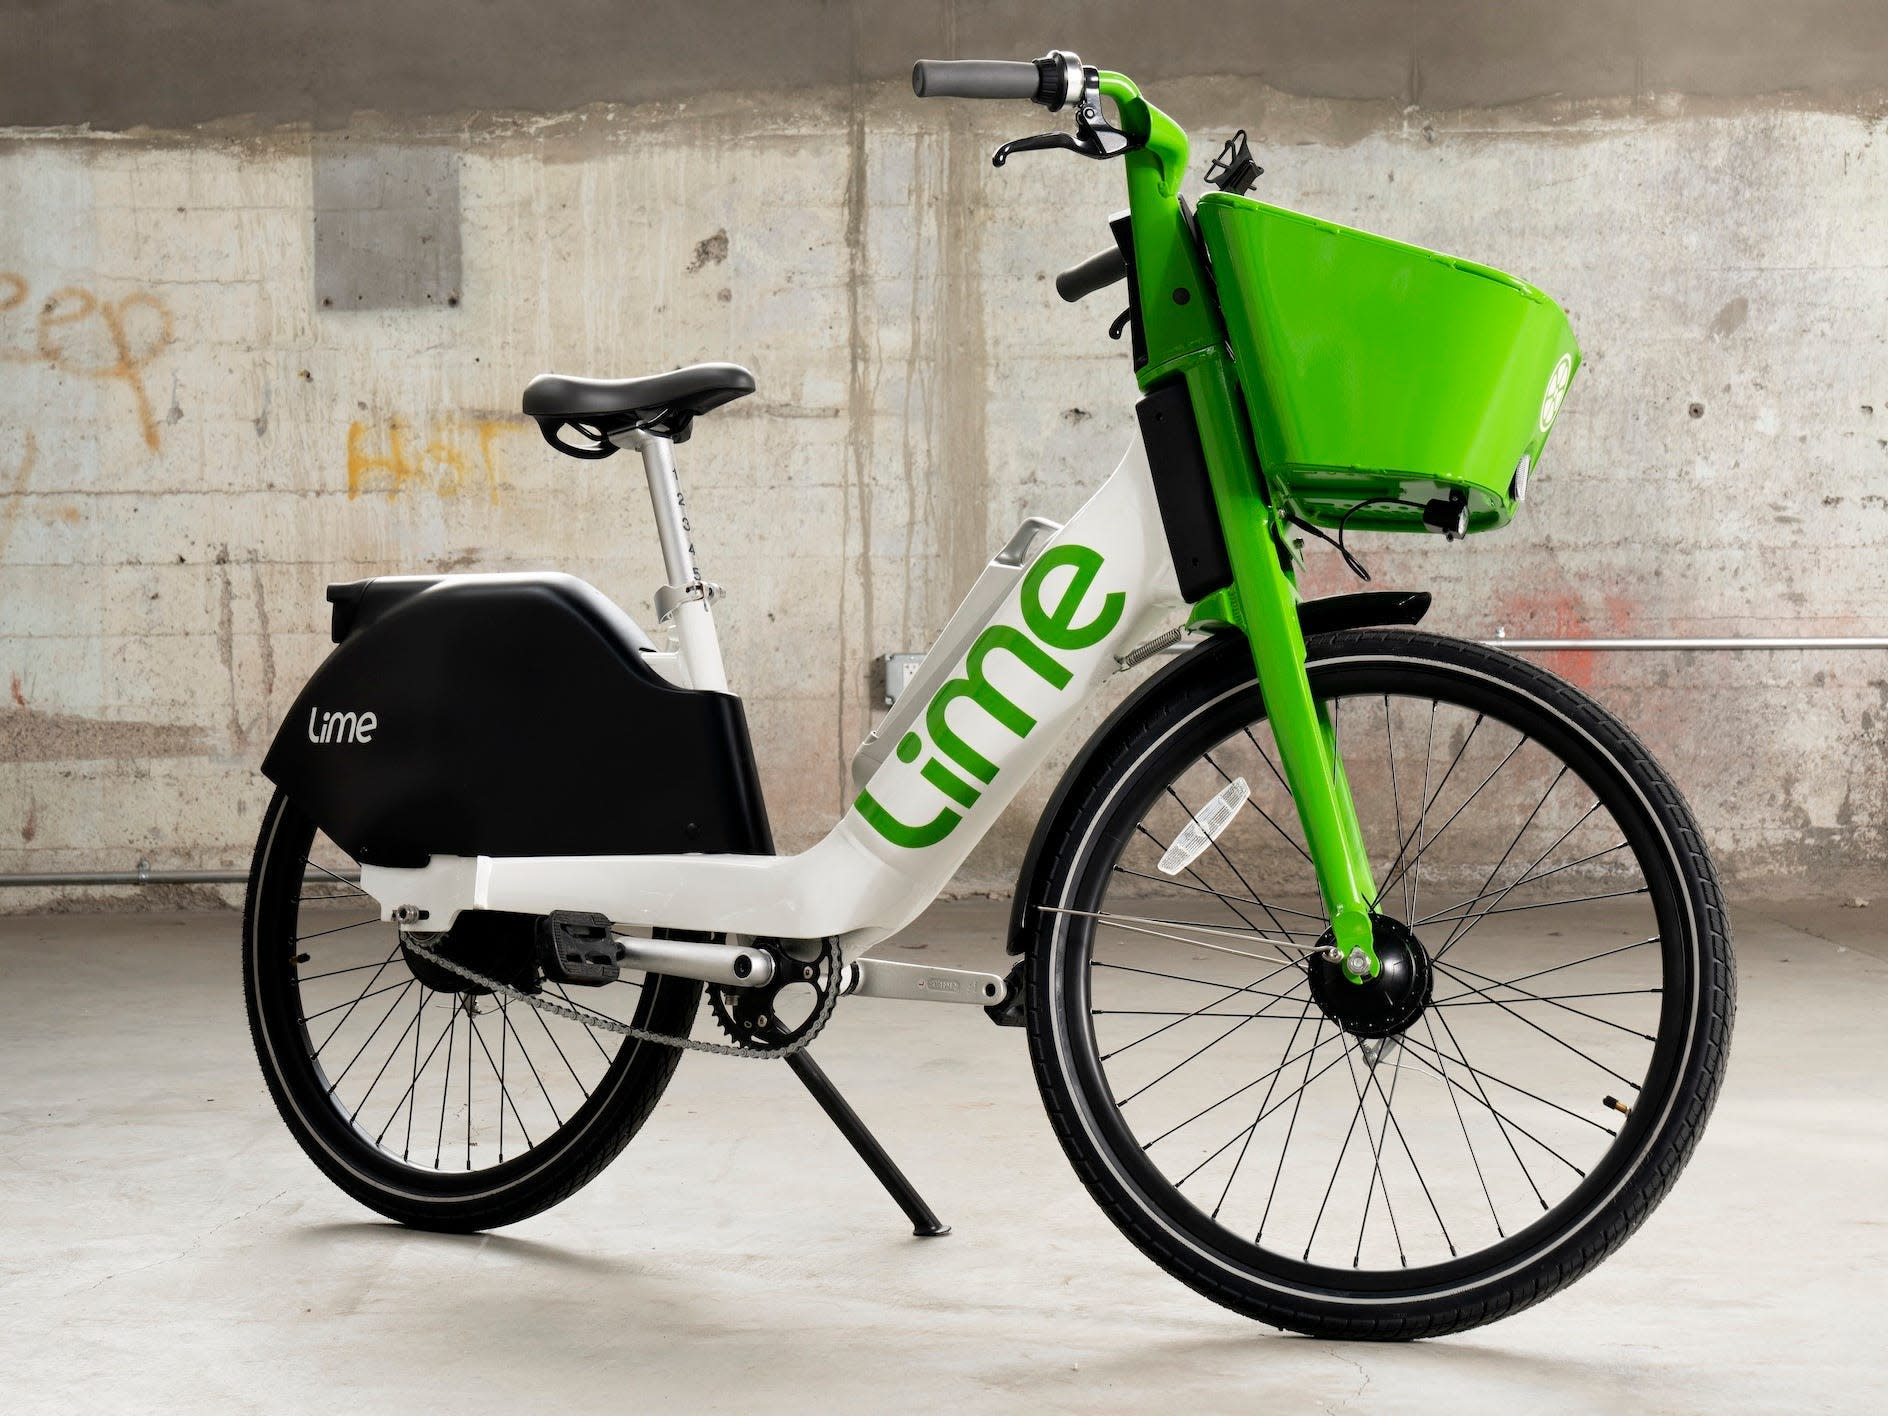 Lime unveiled a new ebike it will take to 25 new cities this year in a